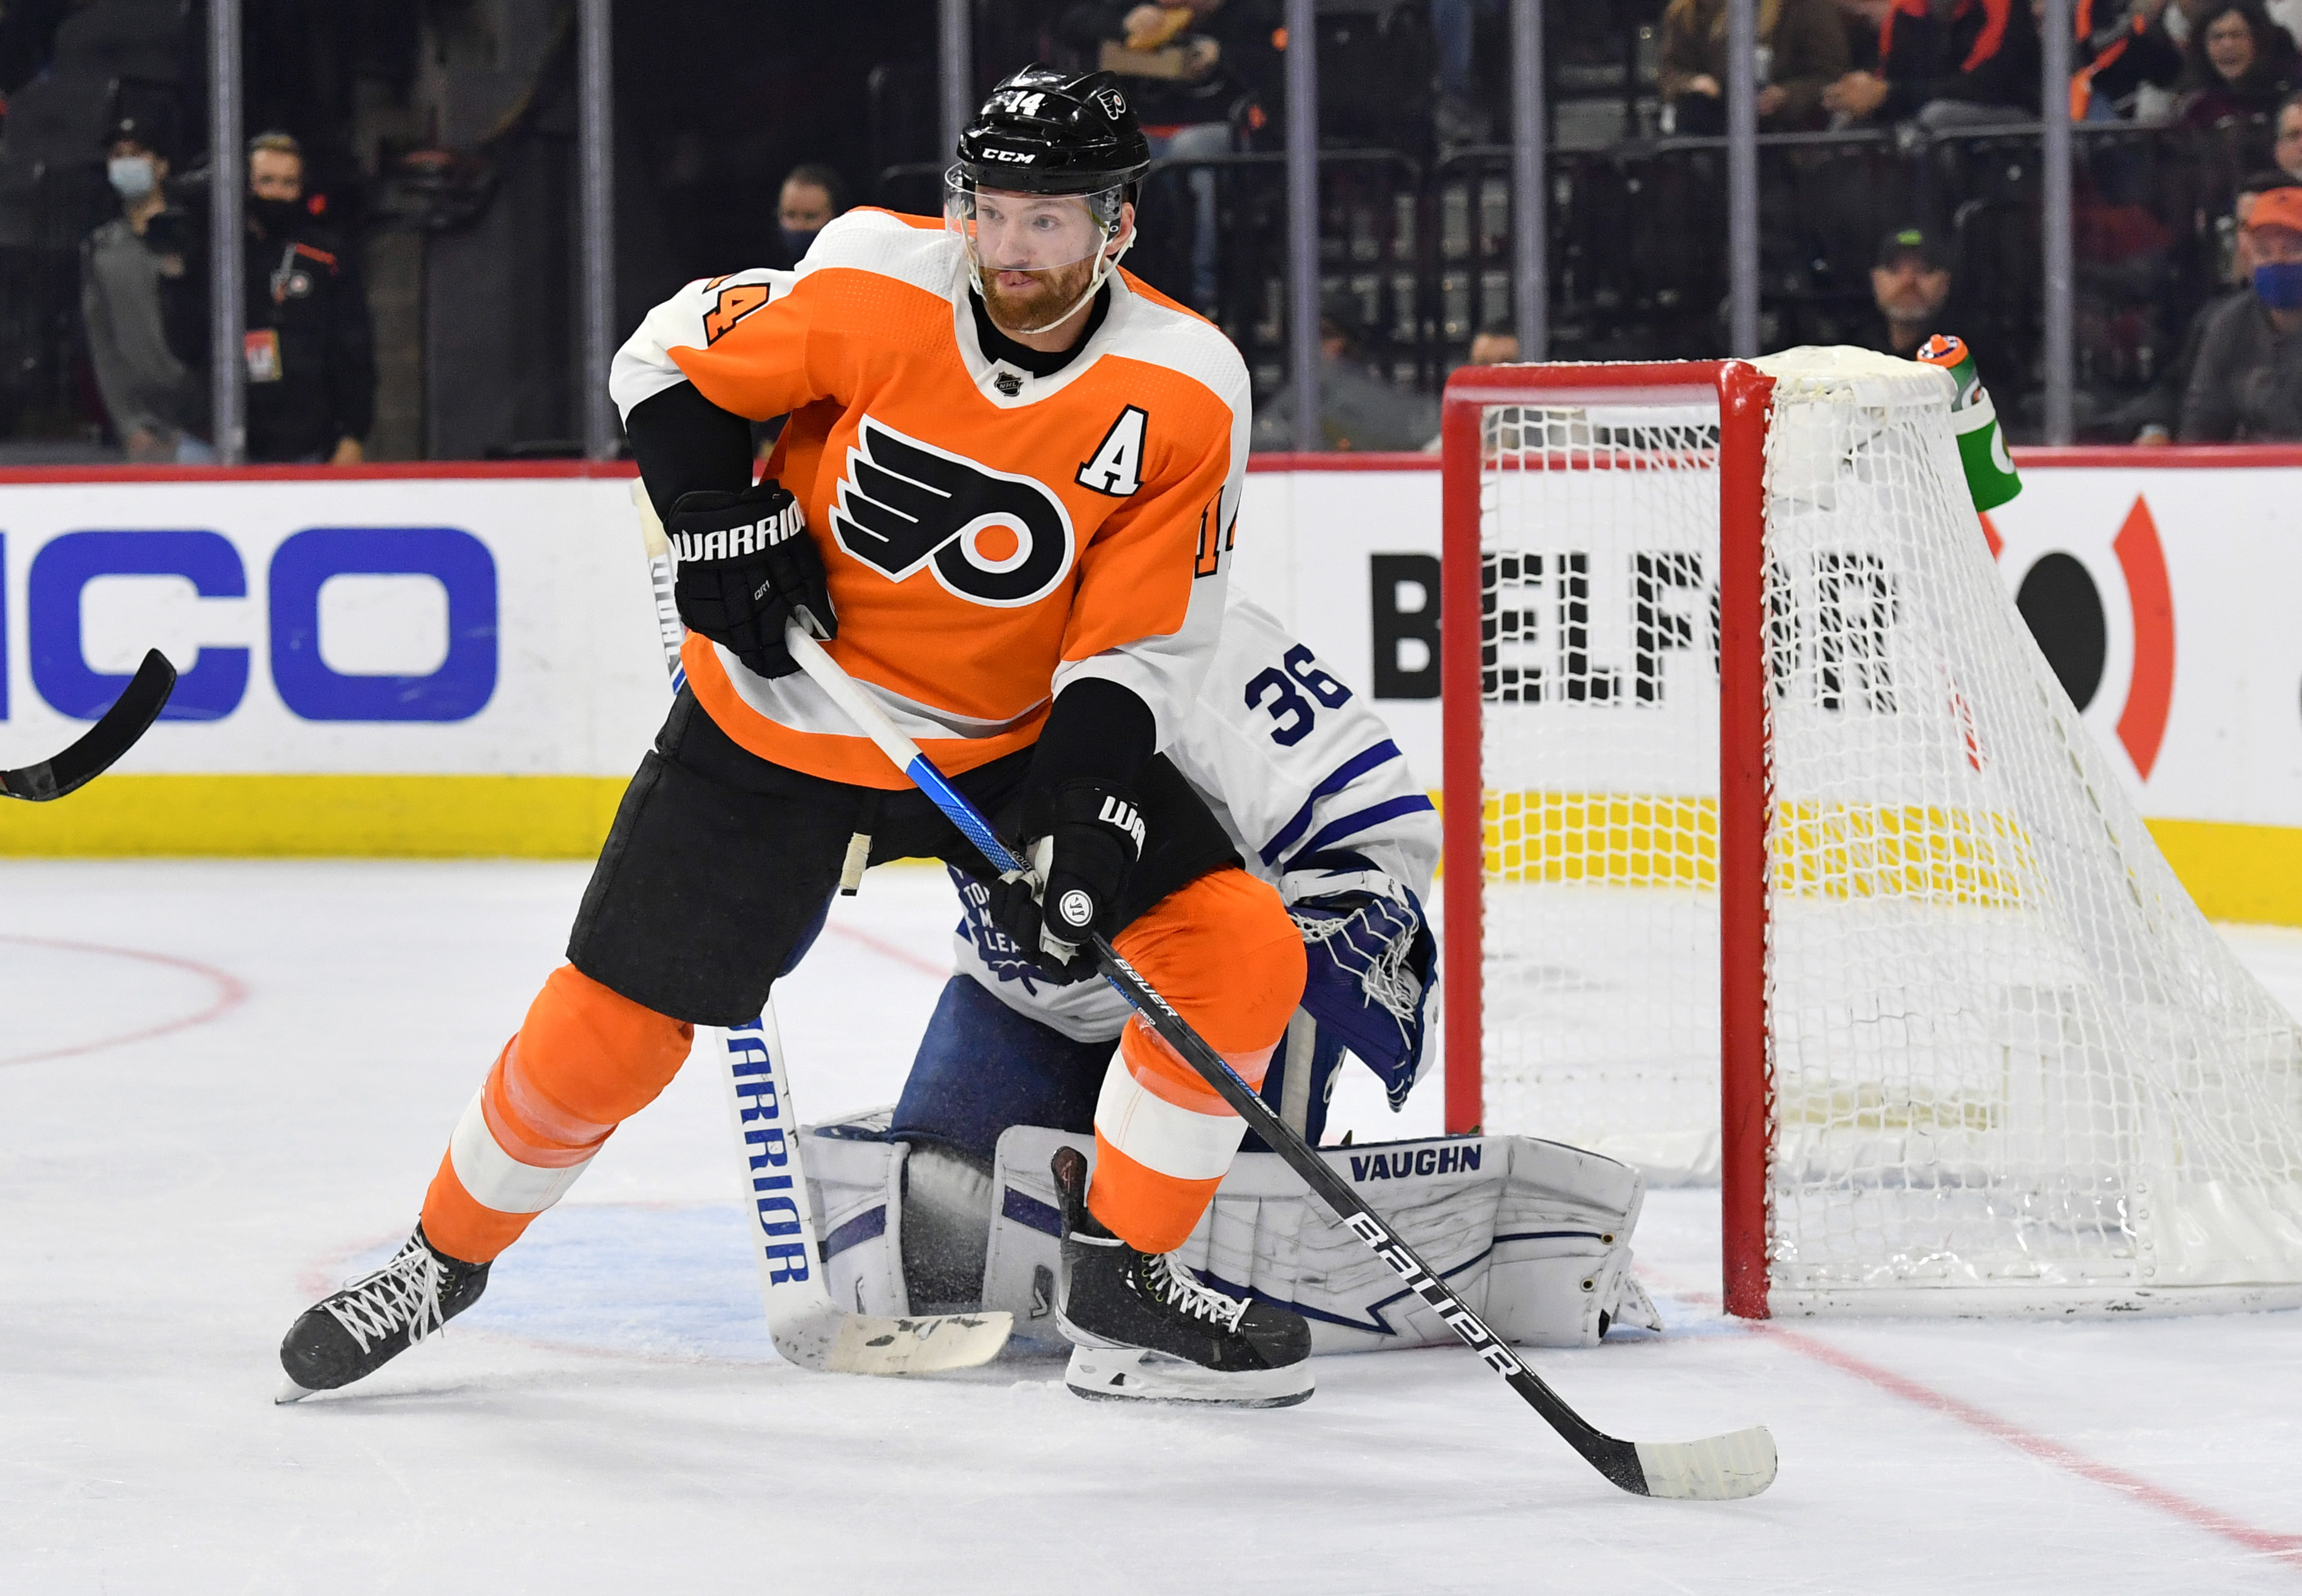 How long is Couturier (Philadelphia Flyers) out for herniated disc?